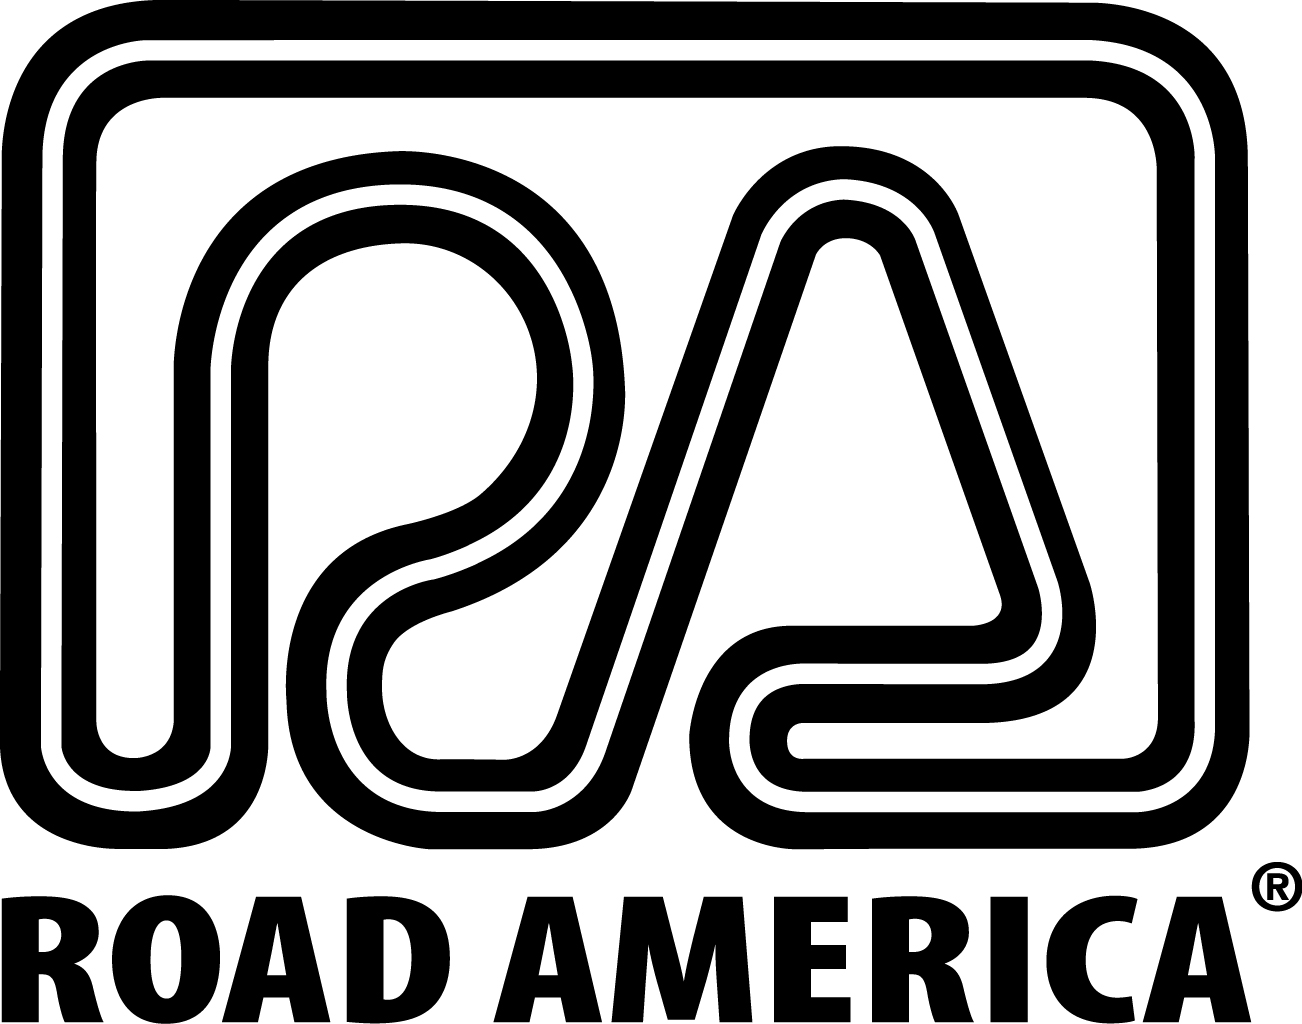 Otto talks with John Ewert about the last events of the season at Road America